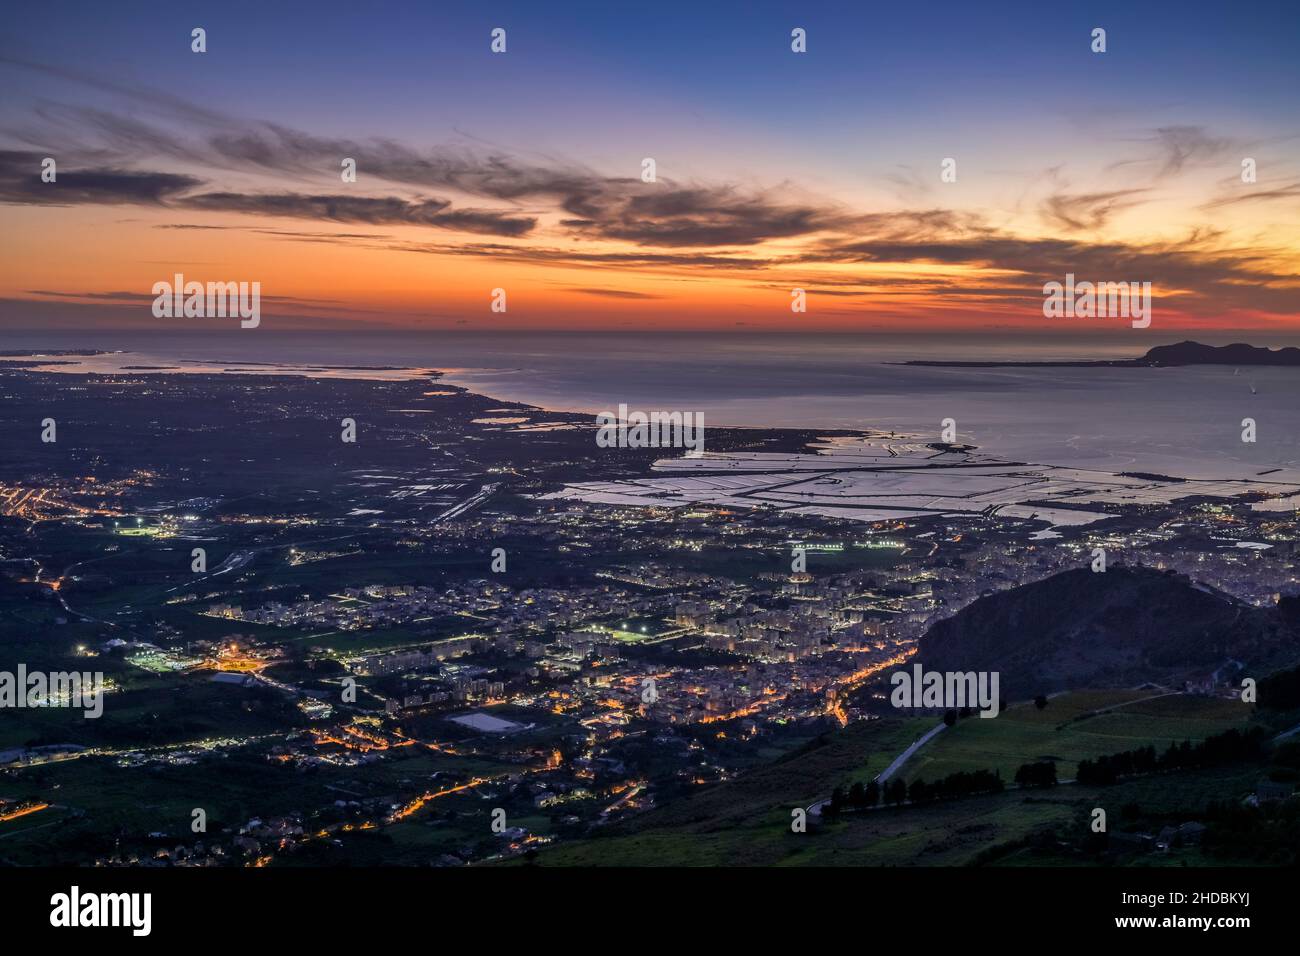 Panorama-Ansicht von Trapani, Sizilien, Italien Banque D'Images